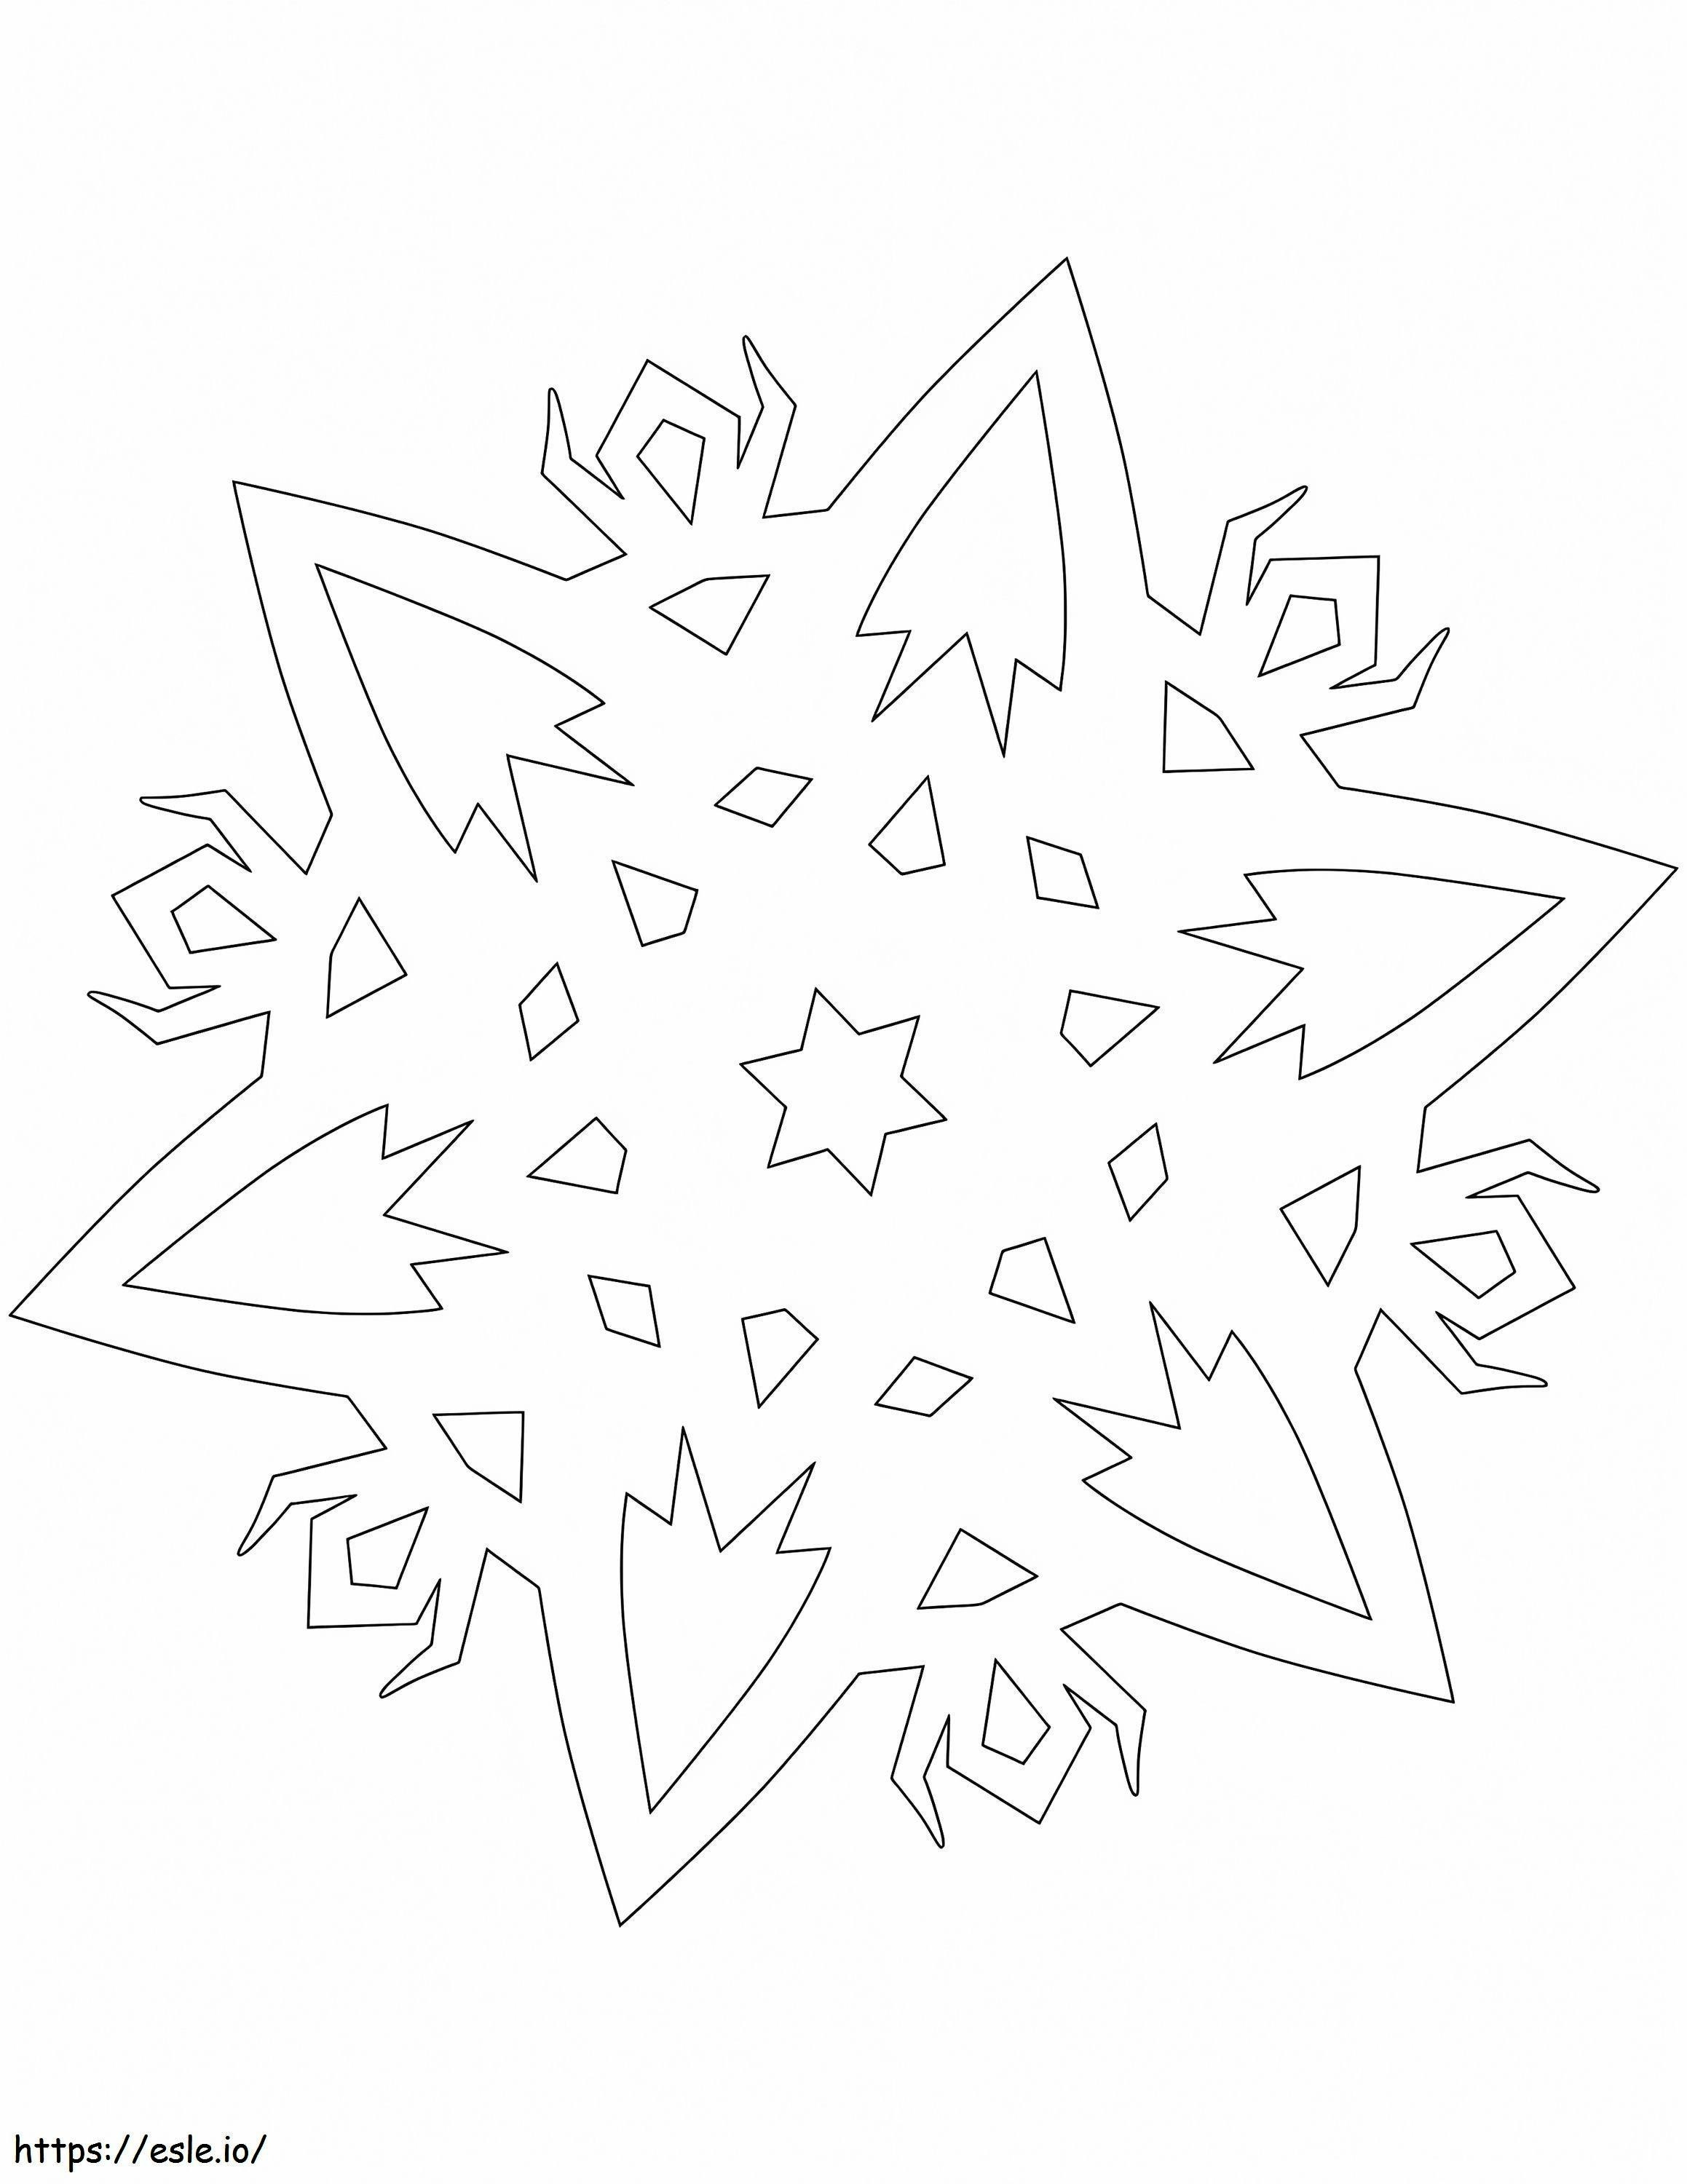 1590114535 Snowflake With Ritual Creatures coloring page